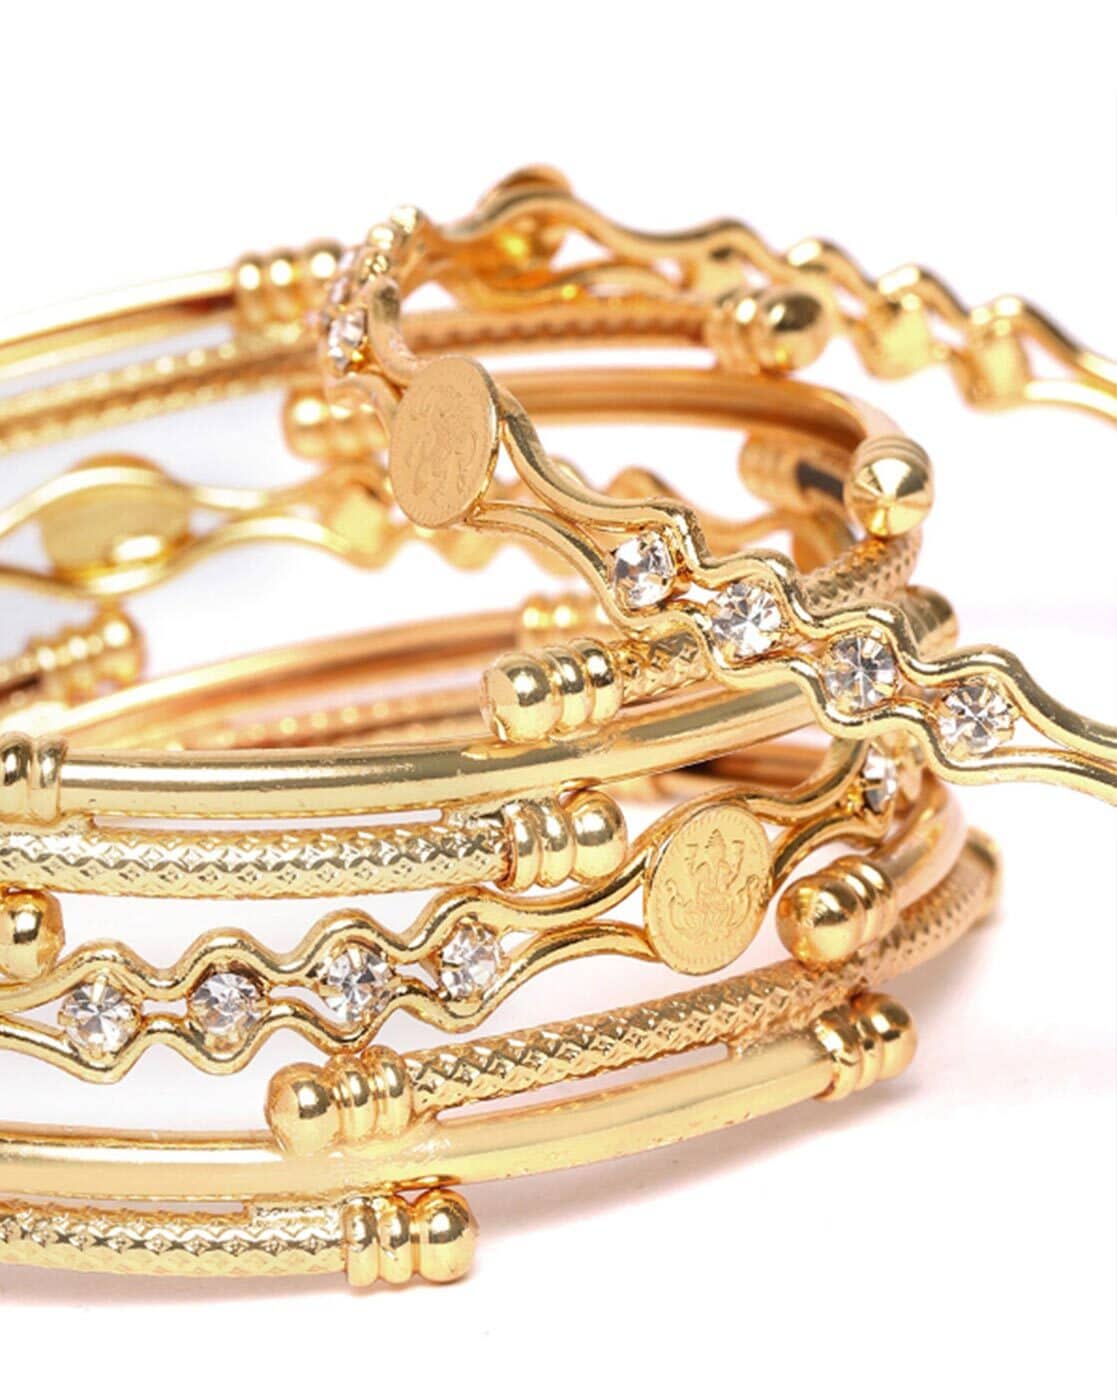 8 Gram Gold Bangles - These 15 Stylish Designs are Trending Now